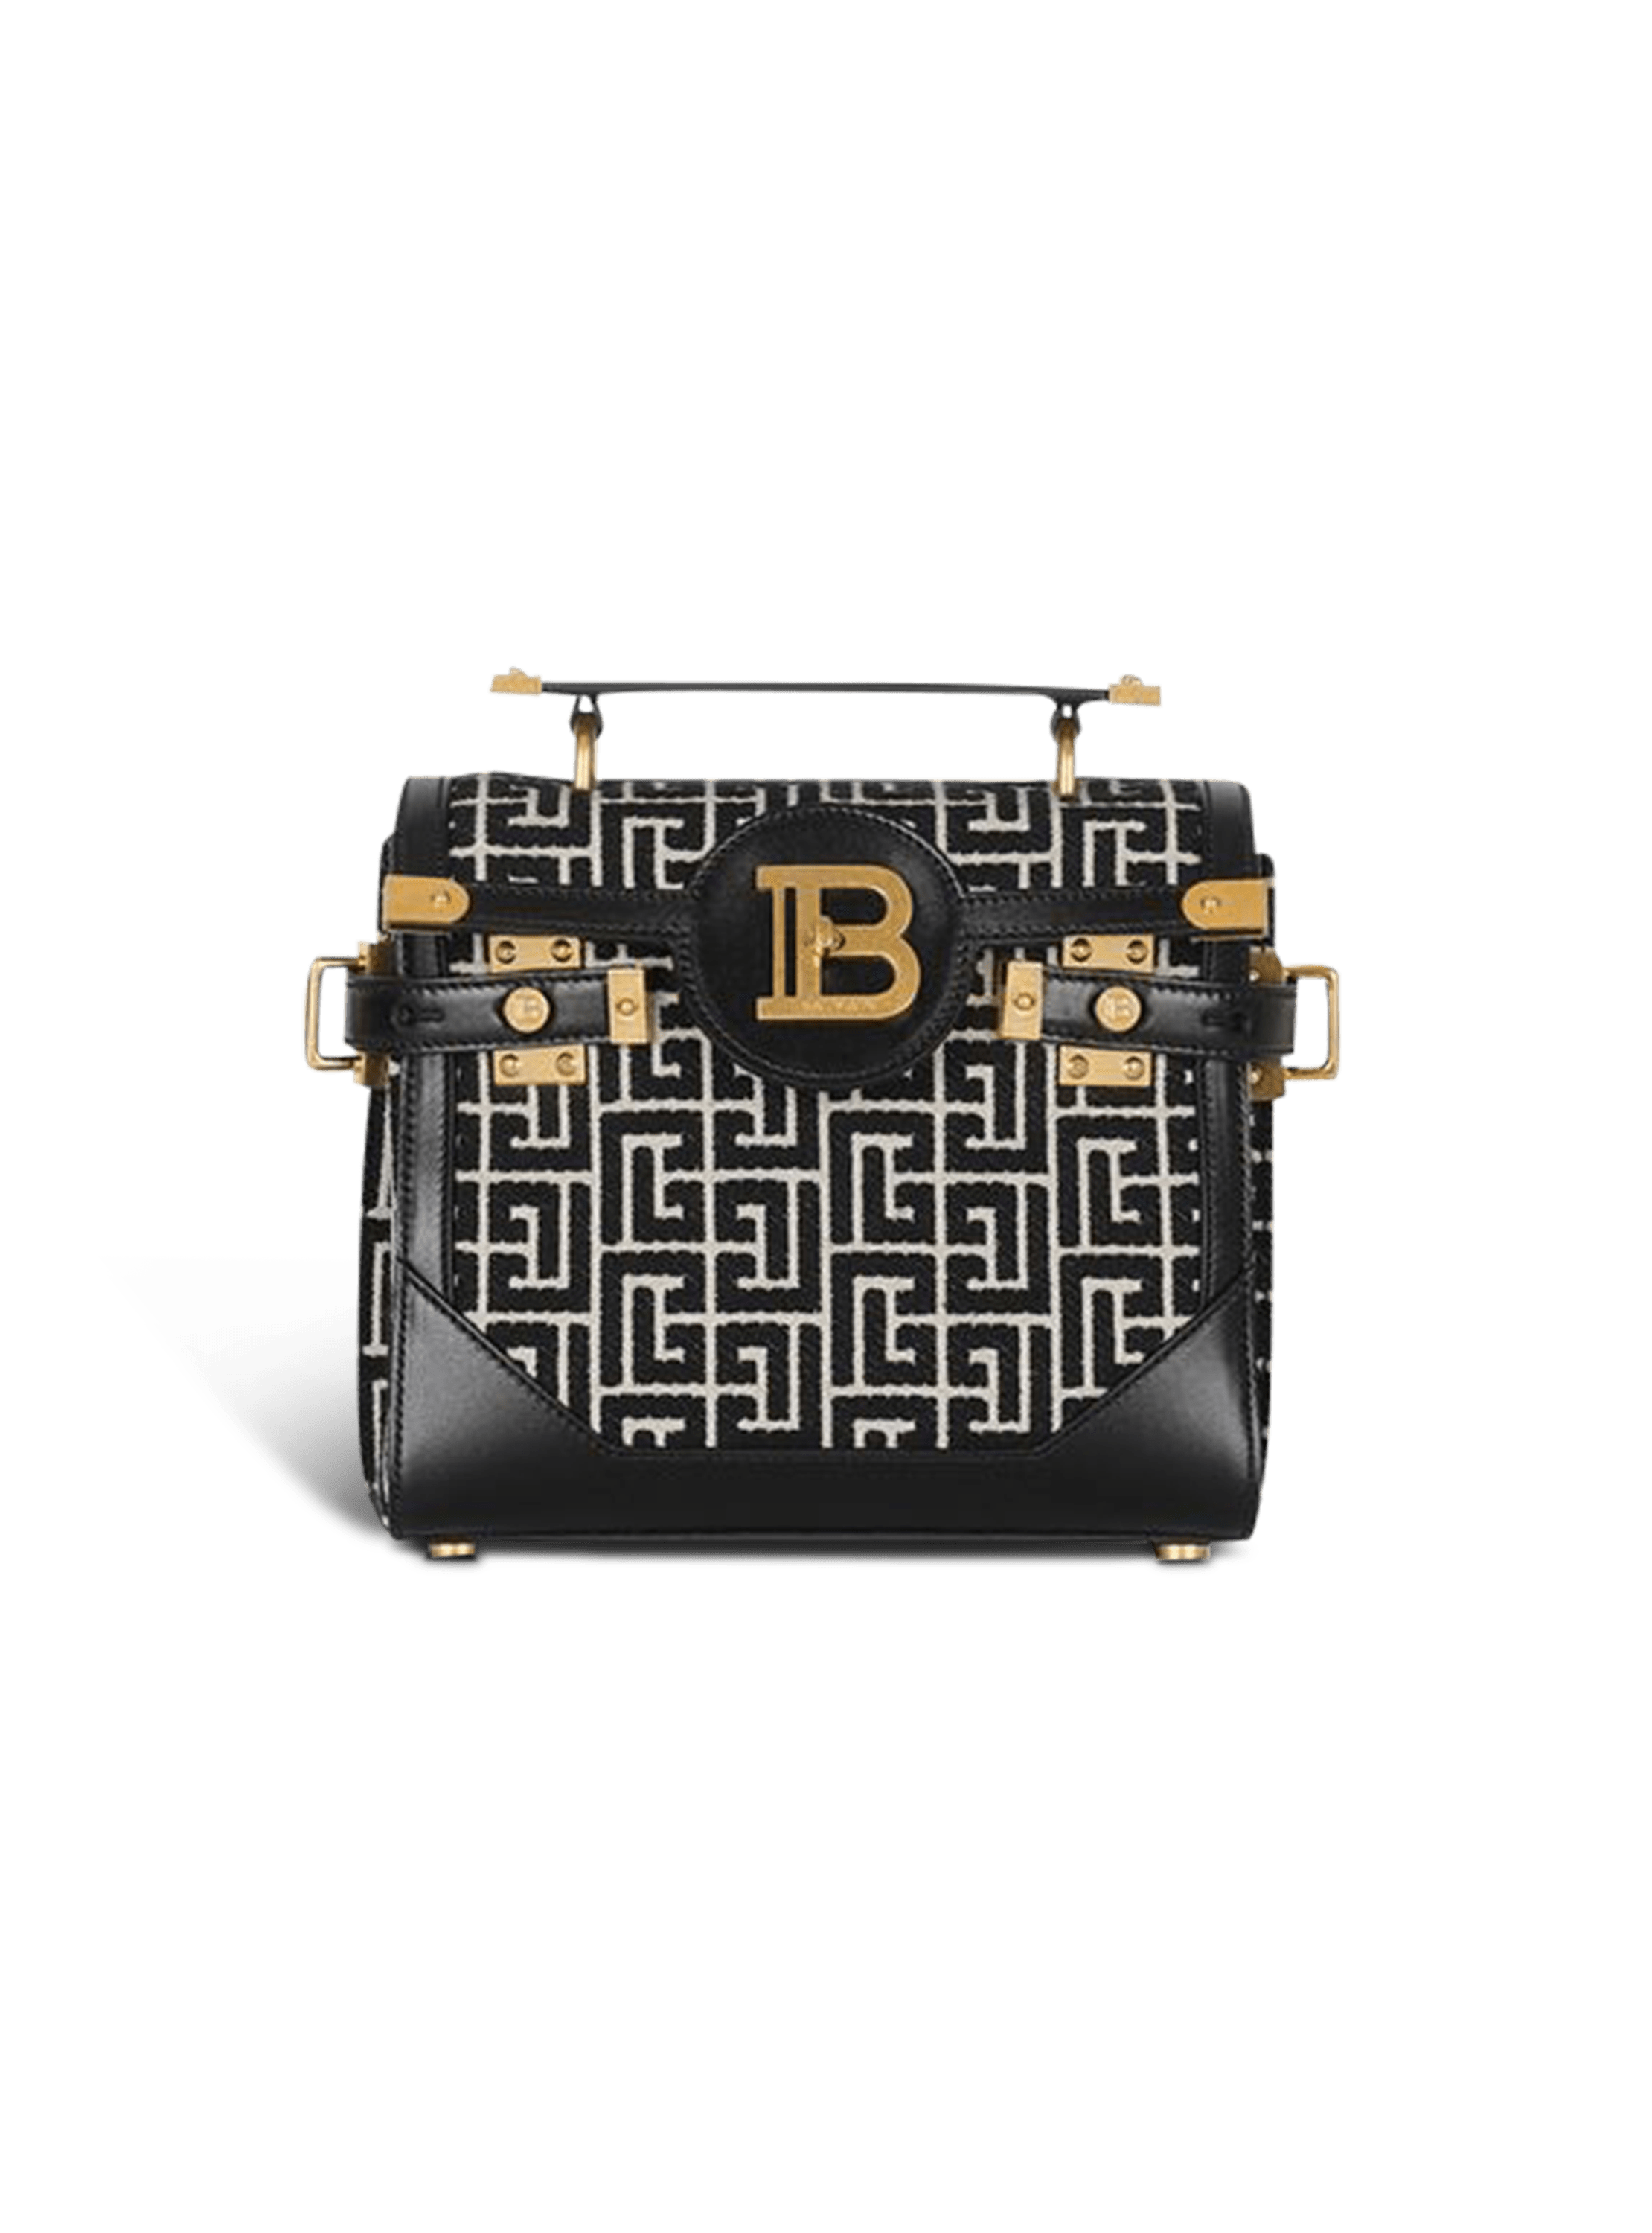 Bicolor jacquard B-Buzz 23 bag with black leather panel